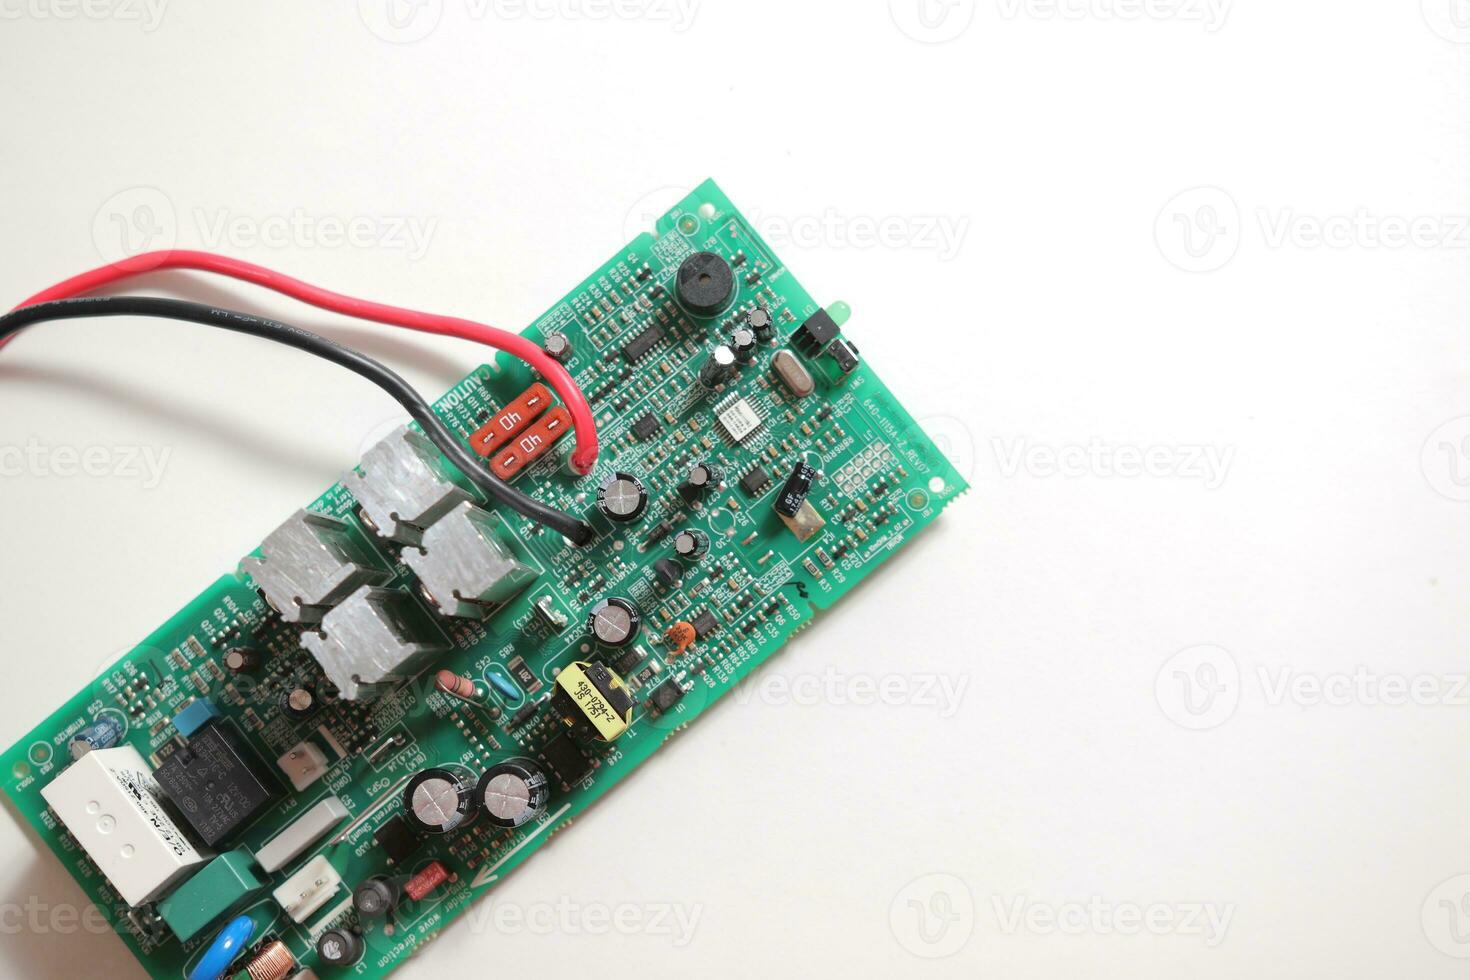 Power Supply modern printed-circuit board with electronic components with transistor. Electrical engineering. photo